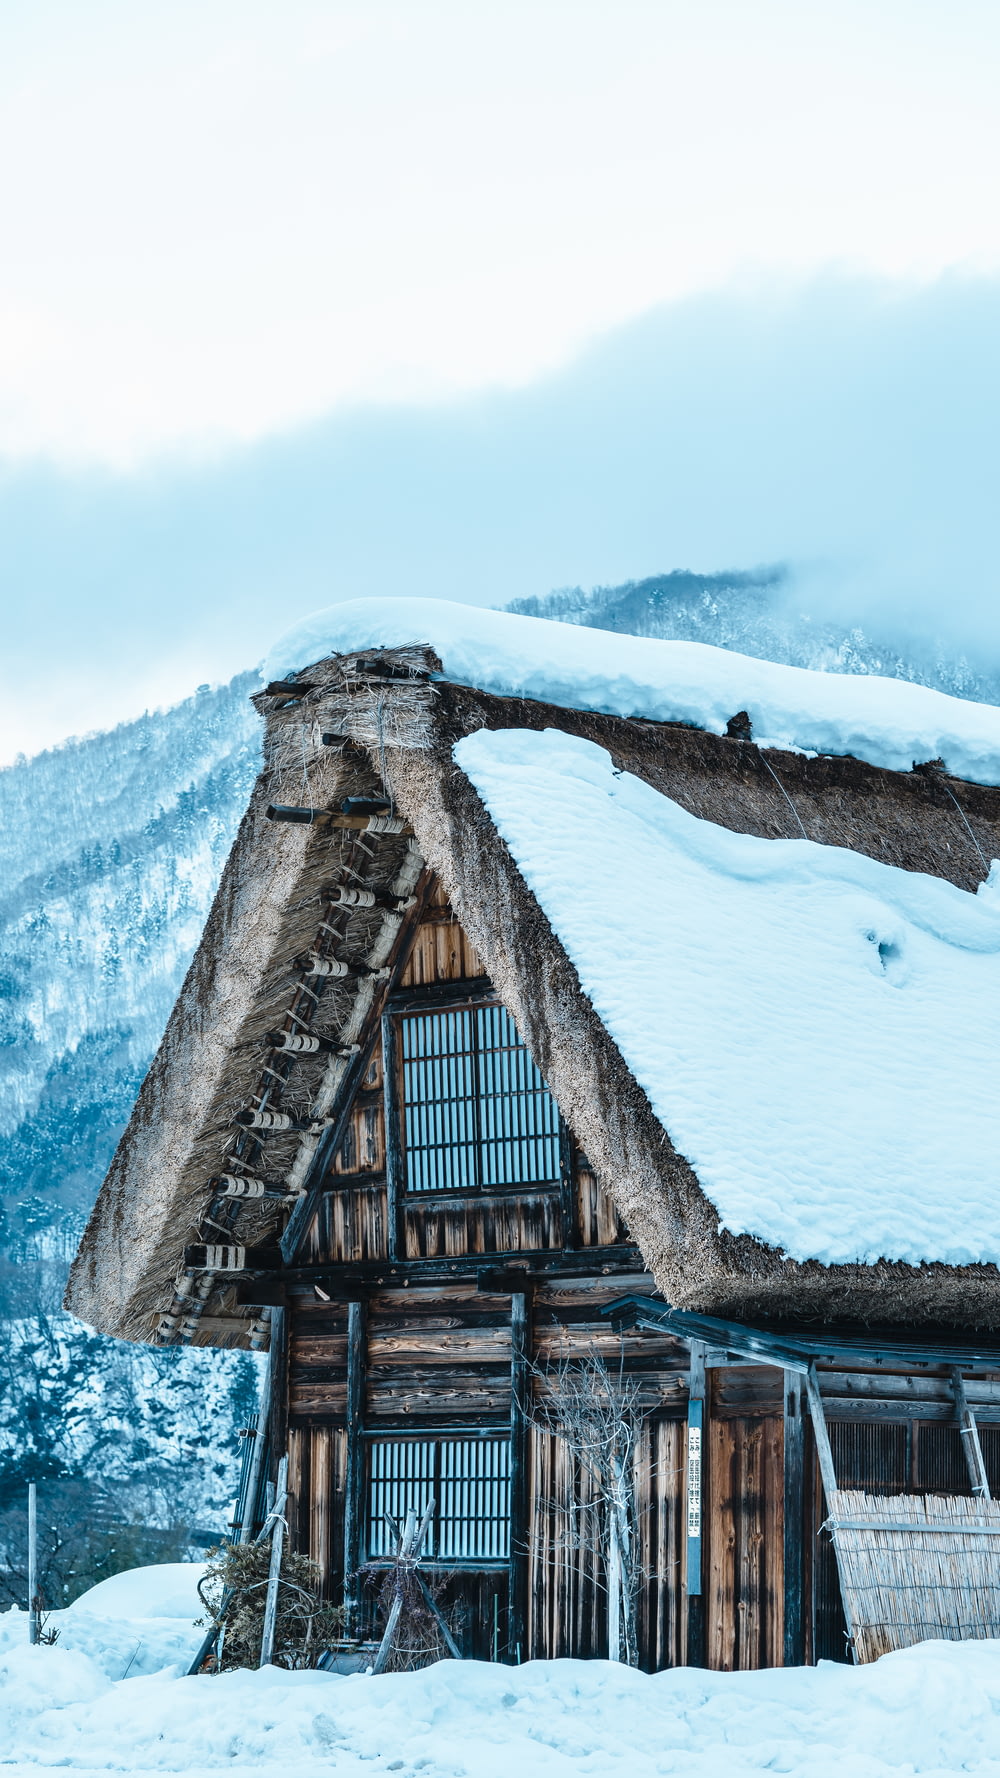 a house with a thatched roof covered in snow